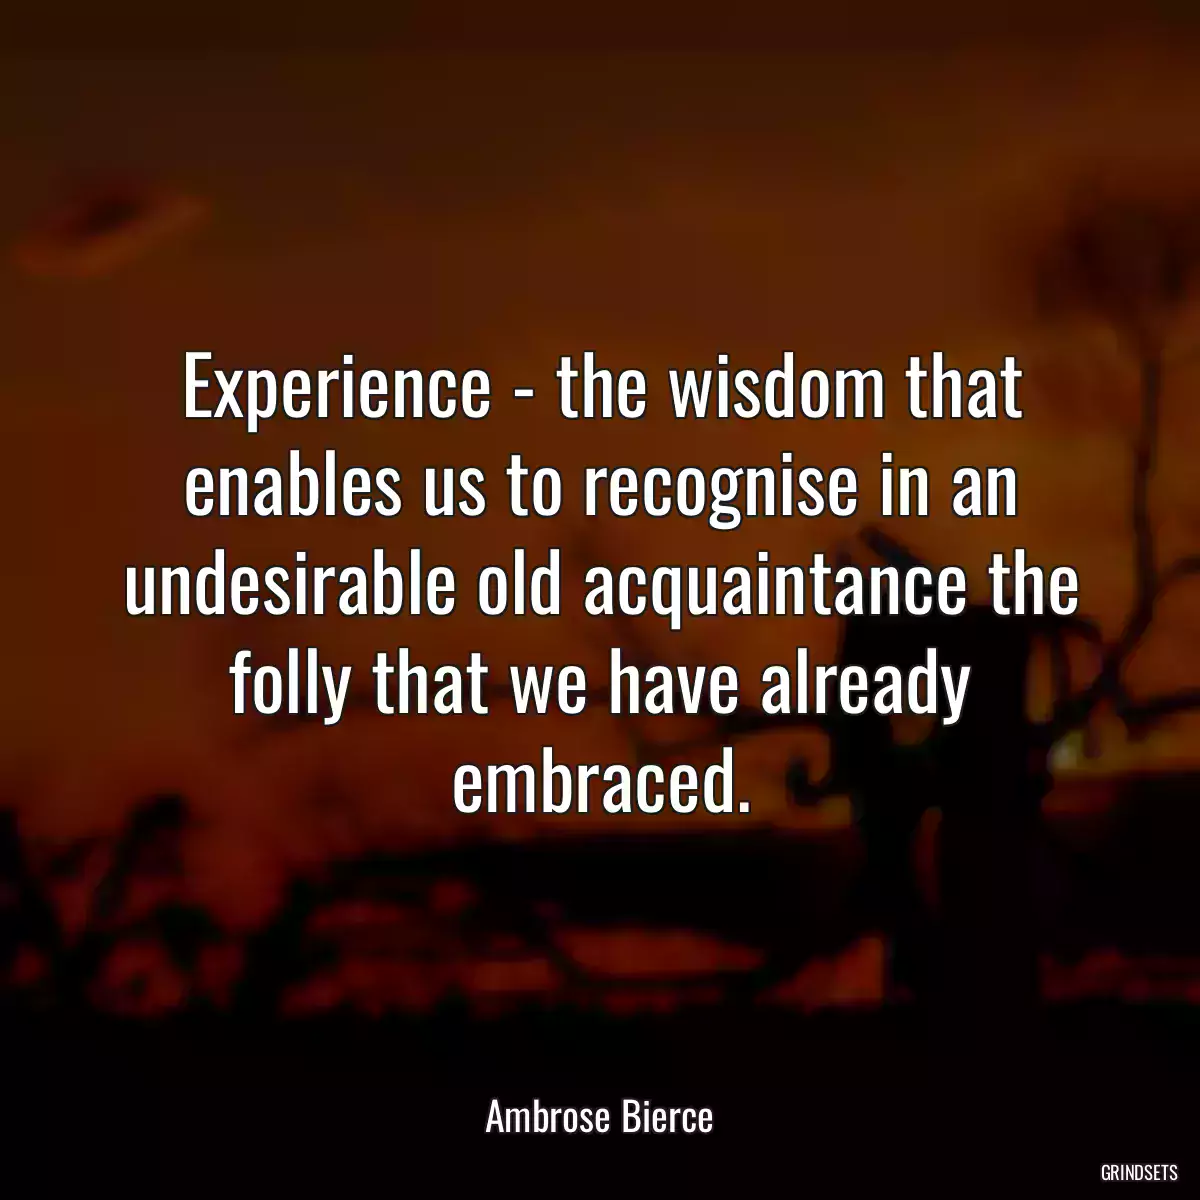 Experience - the wisdom that enables us to recognise in an undesirable old acquaintance the folly that we have already embraced.